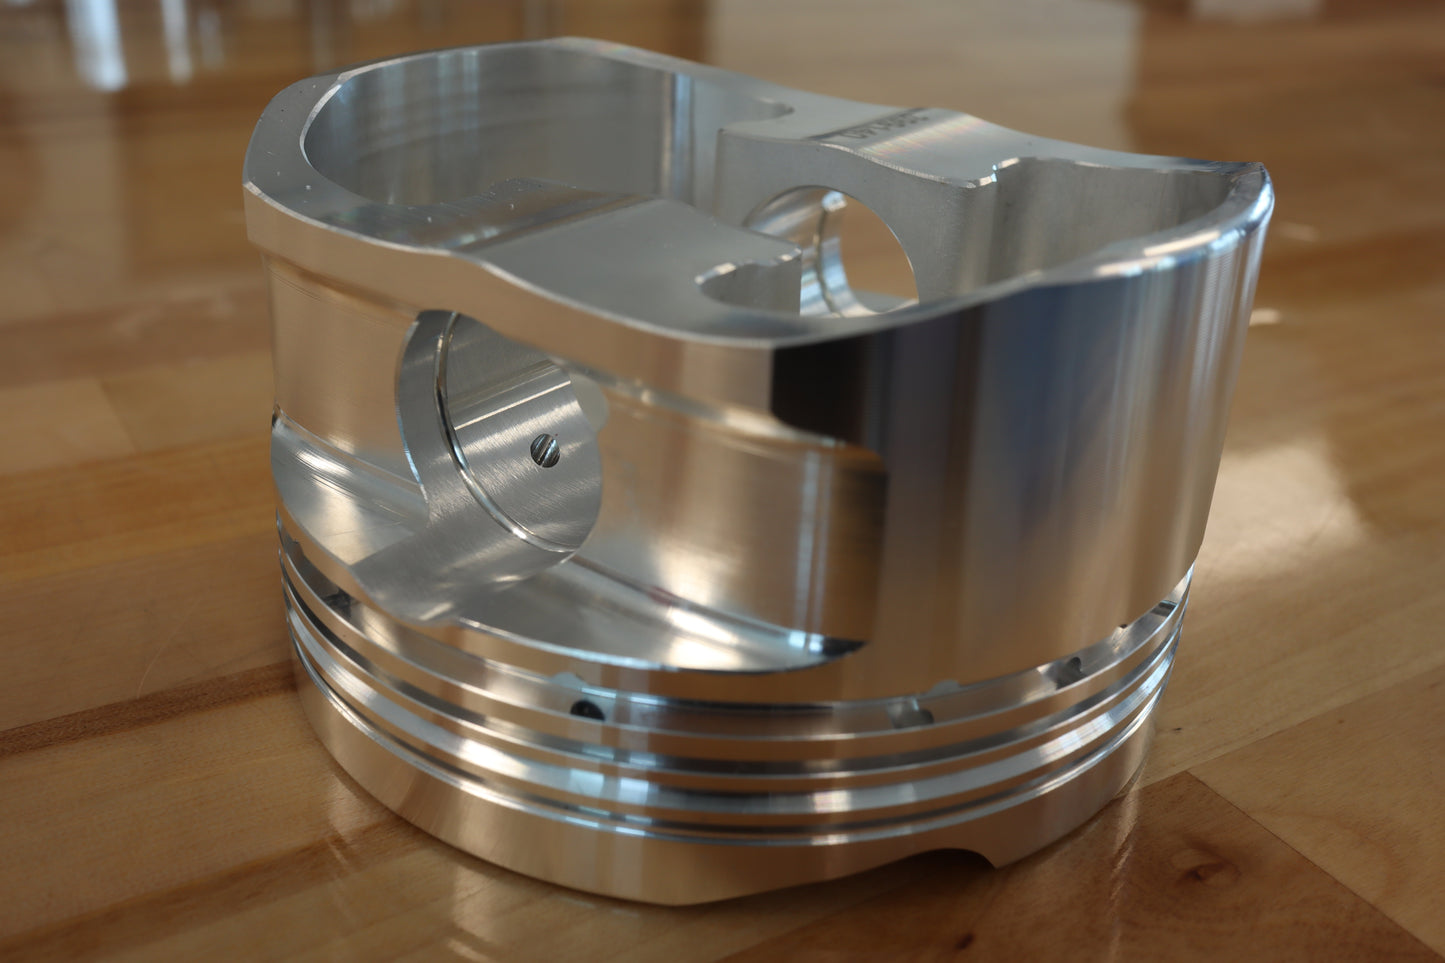 BMW N74 CP Forged Piston Set - Sleeved Block